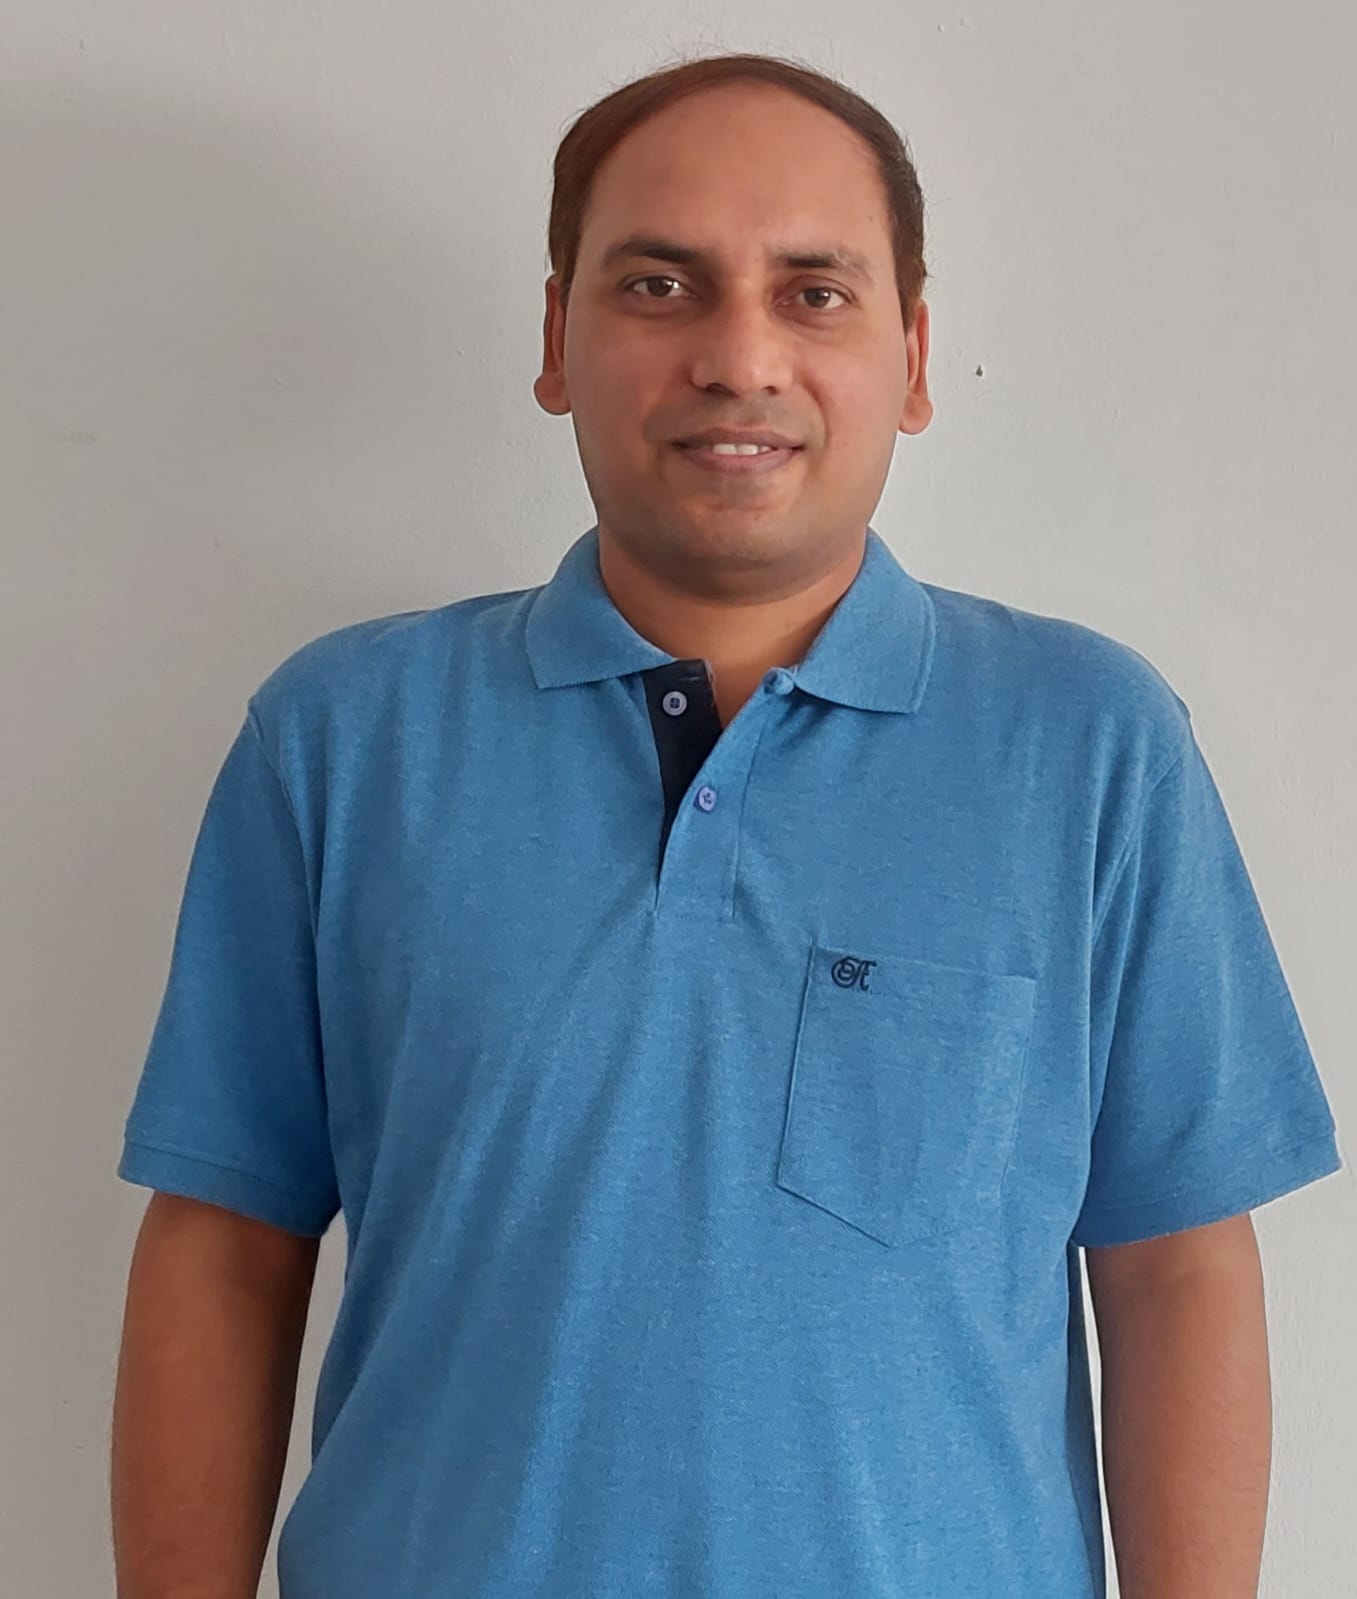 Sudeep Tiwari, pictured smiling against a light colored wall in a light blue, short sleeved shirt.